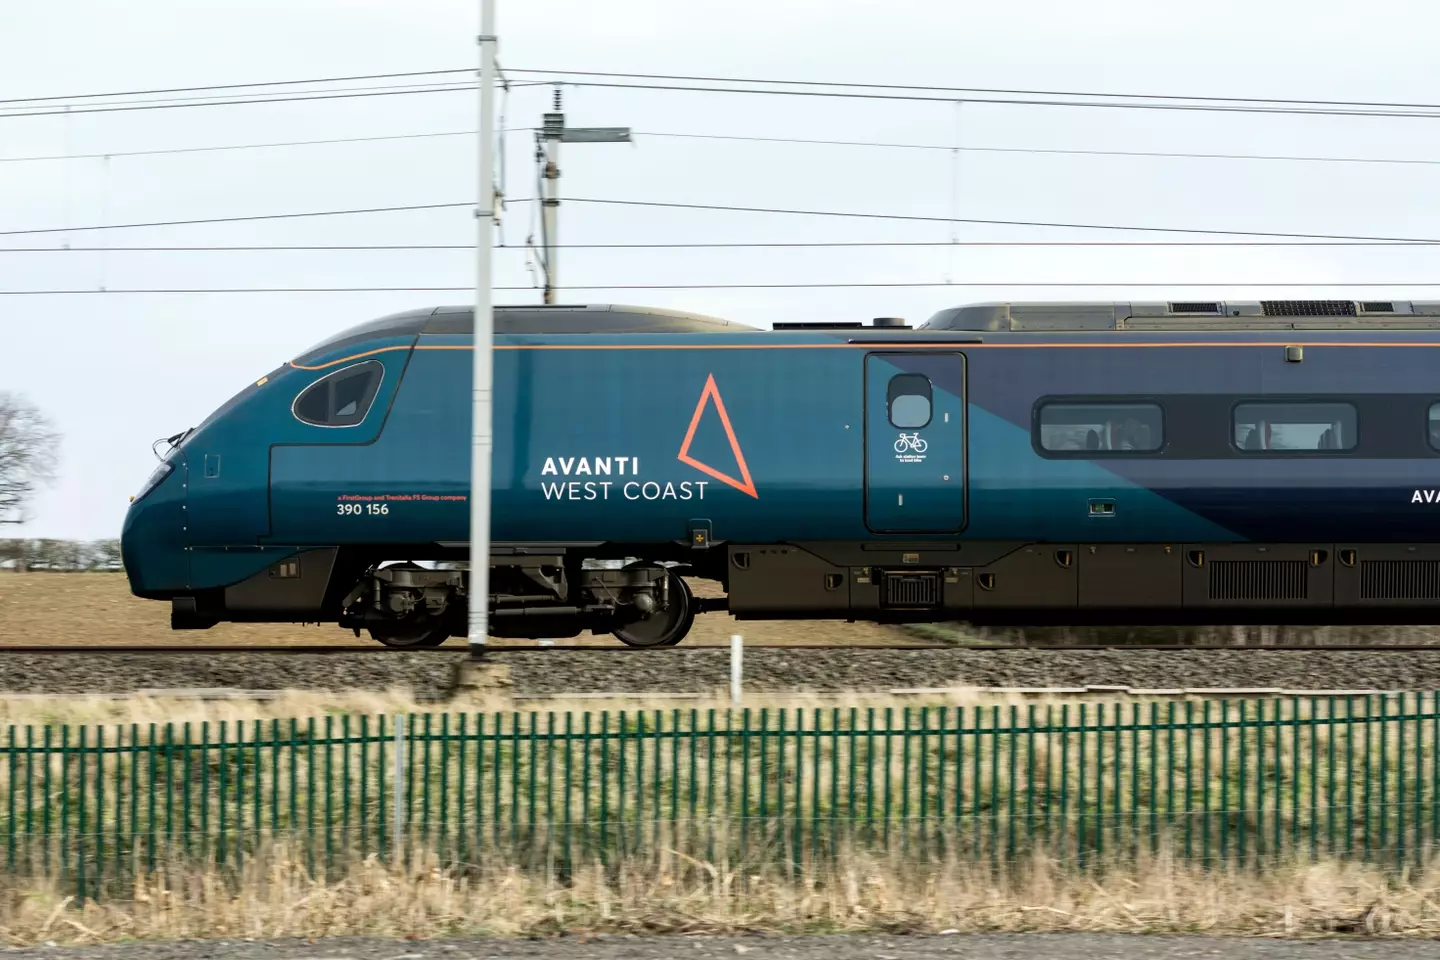 Avanti West Coast runs trains between the North West, London, and Wales.